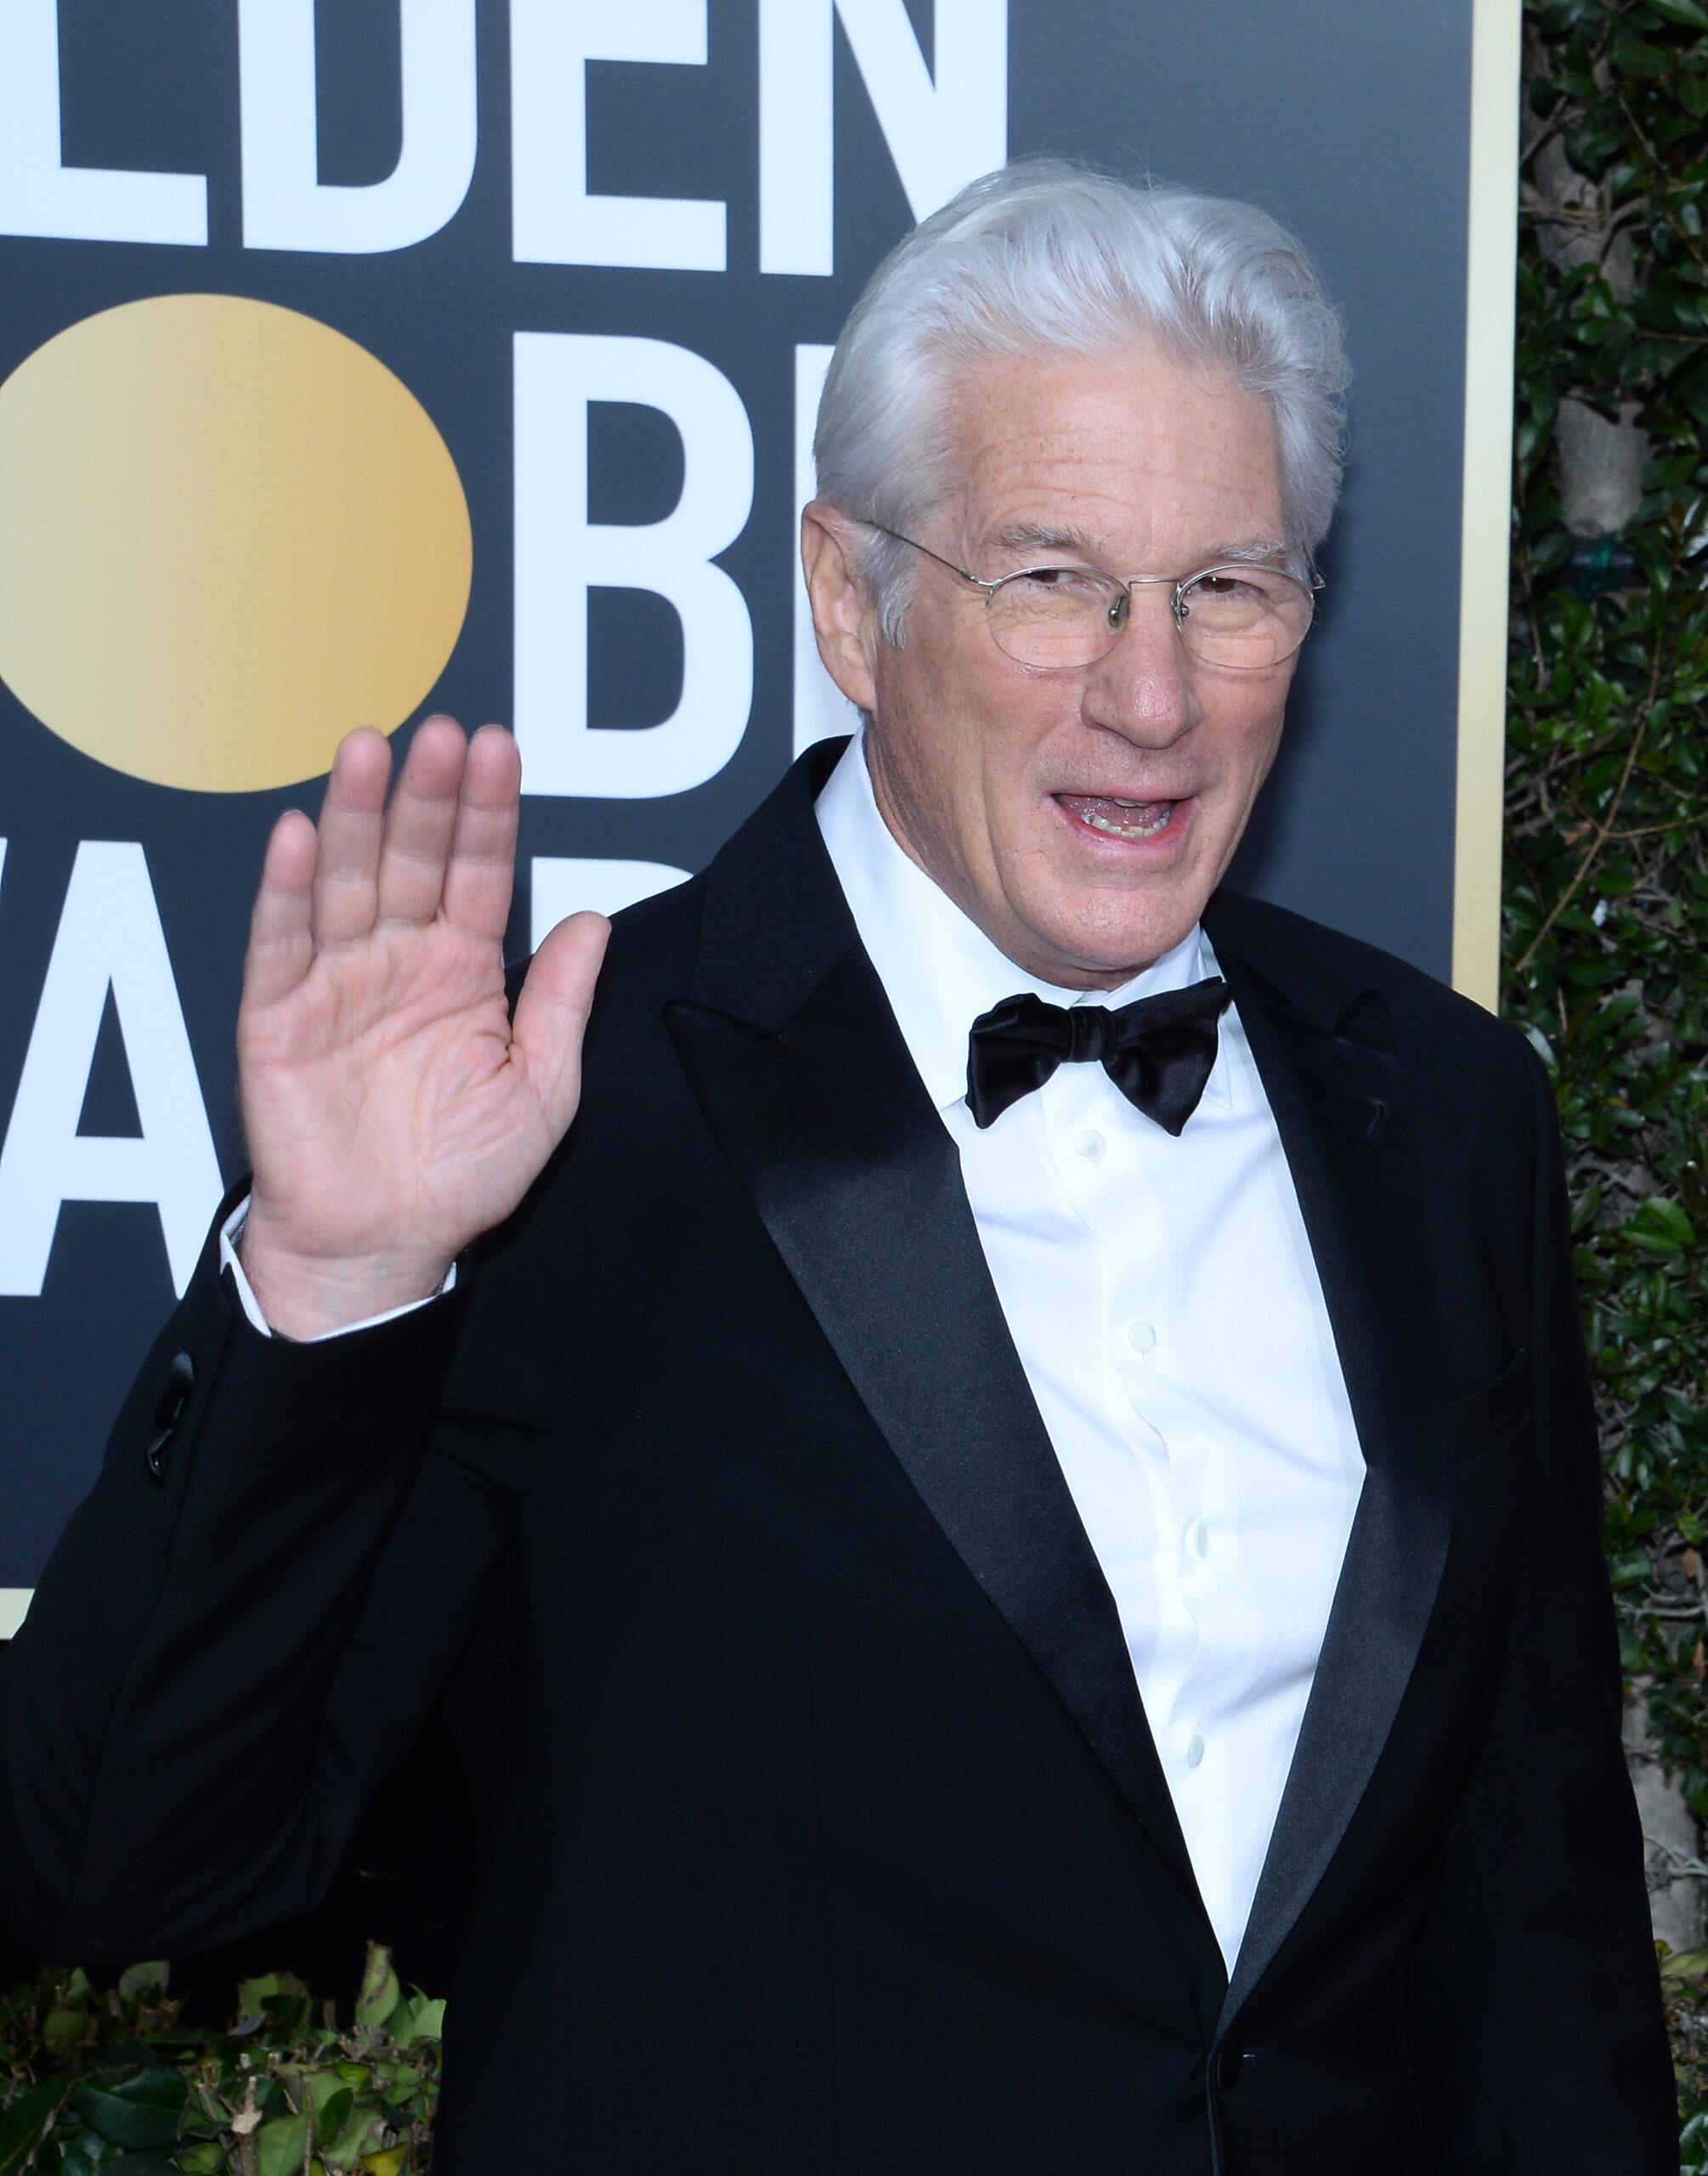 Actor Richard Gere attends the 76th annual Golden Globe Awards at the Beverly Hilton Hotel in Beverly Hills, California on January 6, 2019. 